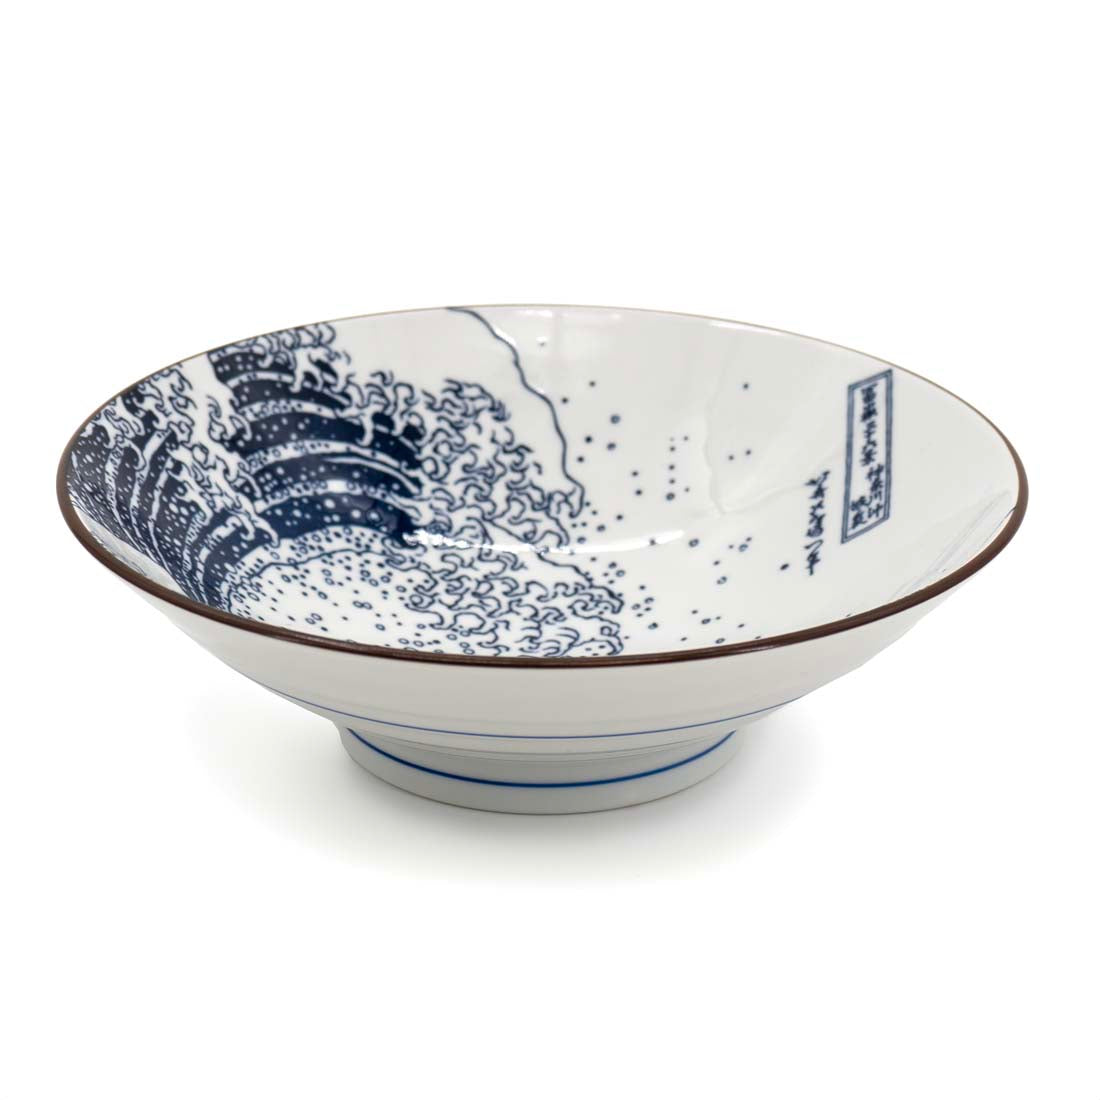 The Great Wave Ceramic Serving Bowl